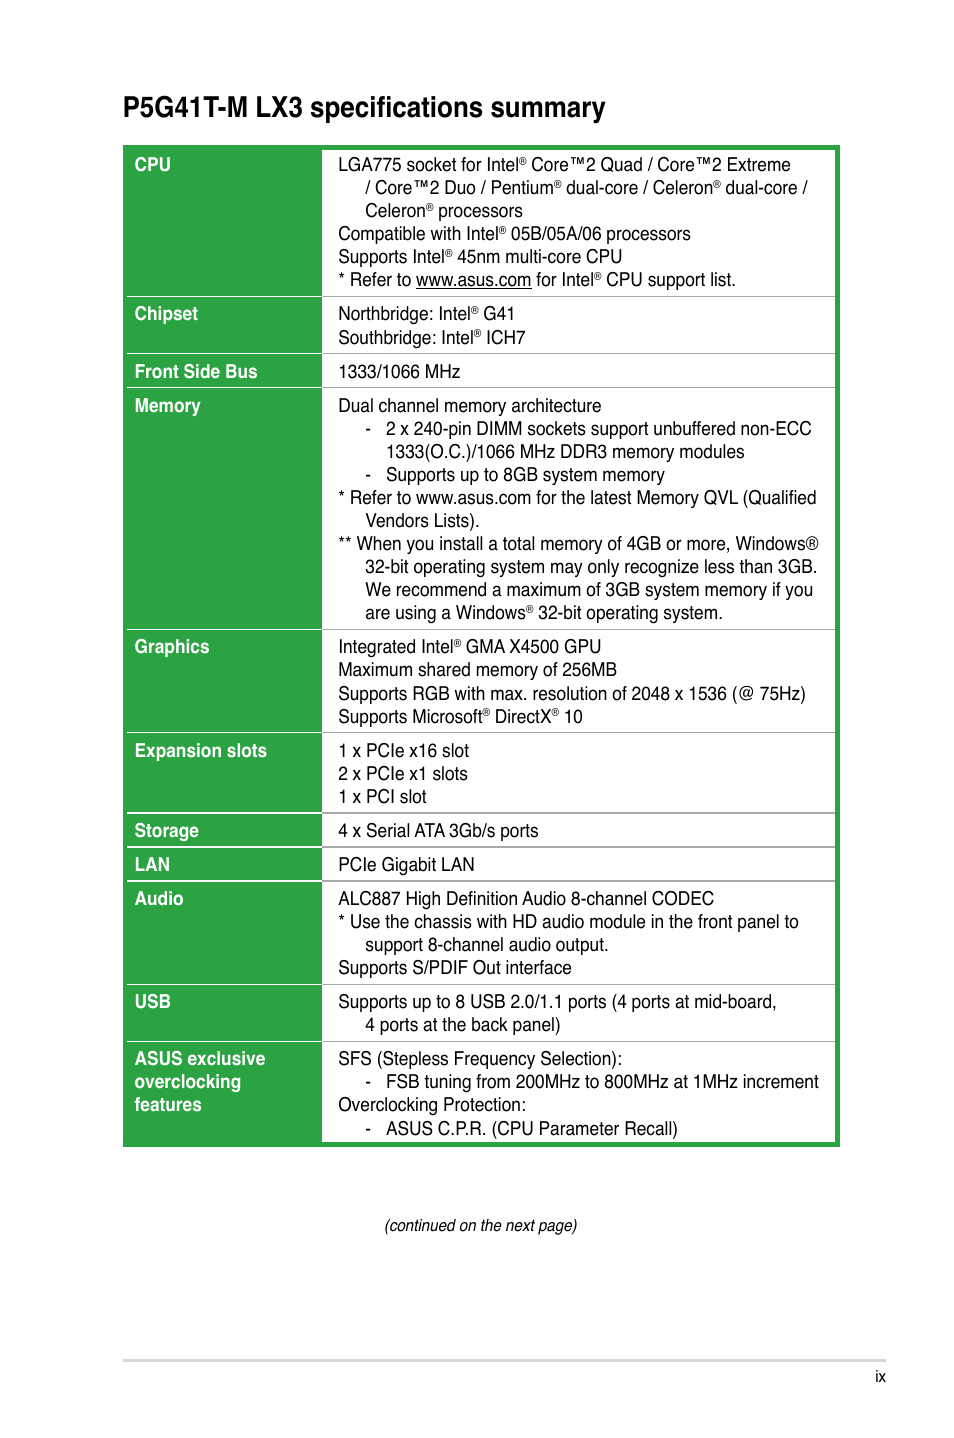 P5g41t-m lx3 specifications summary | Asus P5G41T-M LX3 User Manual | Page  9 / 60